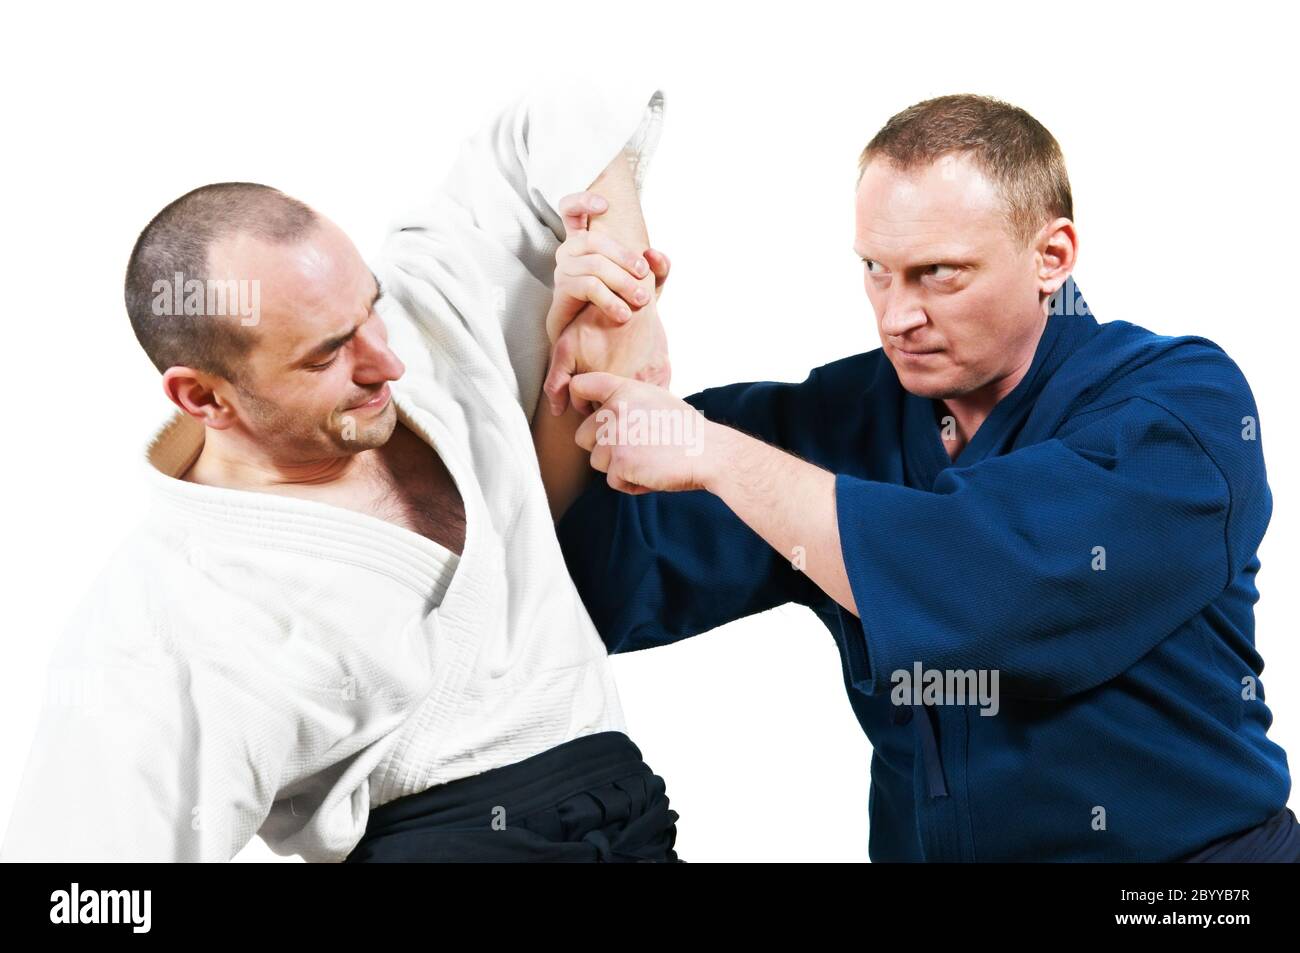 Sparring of two jujitsu fighters Stock Photo